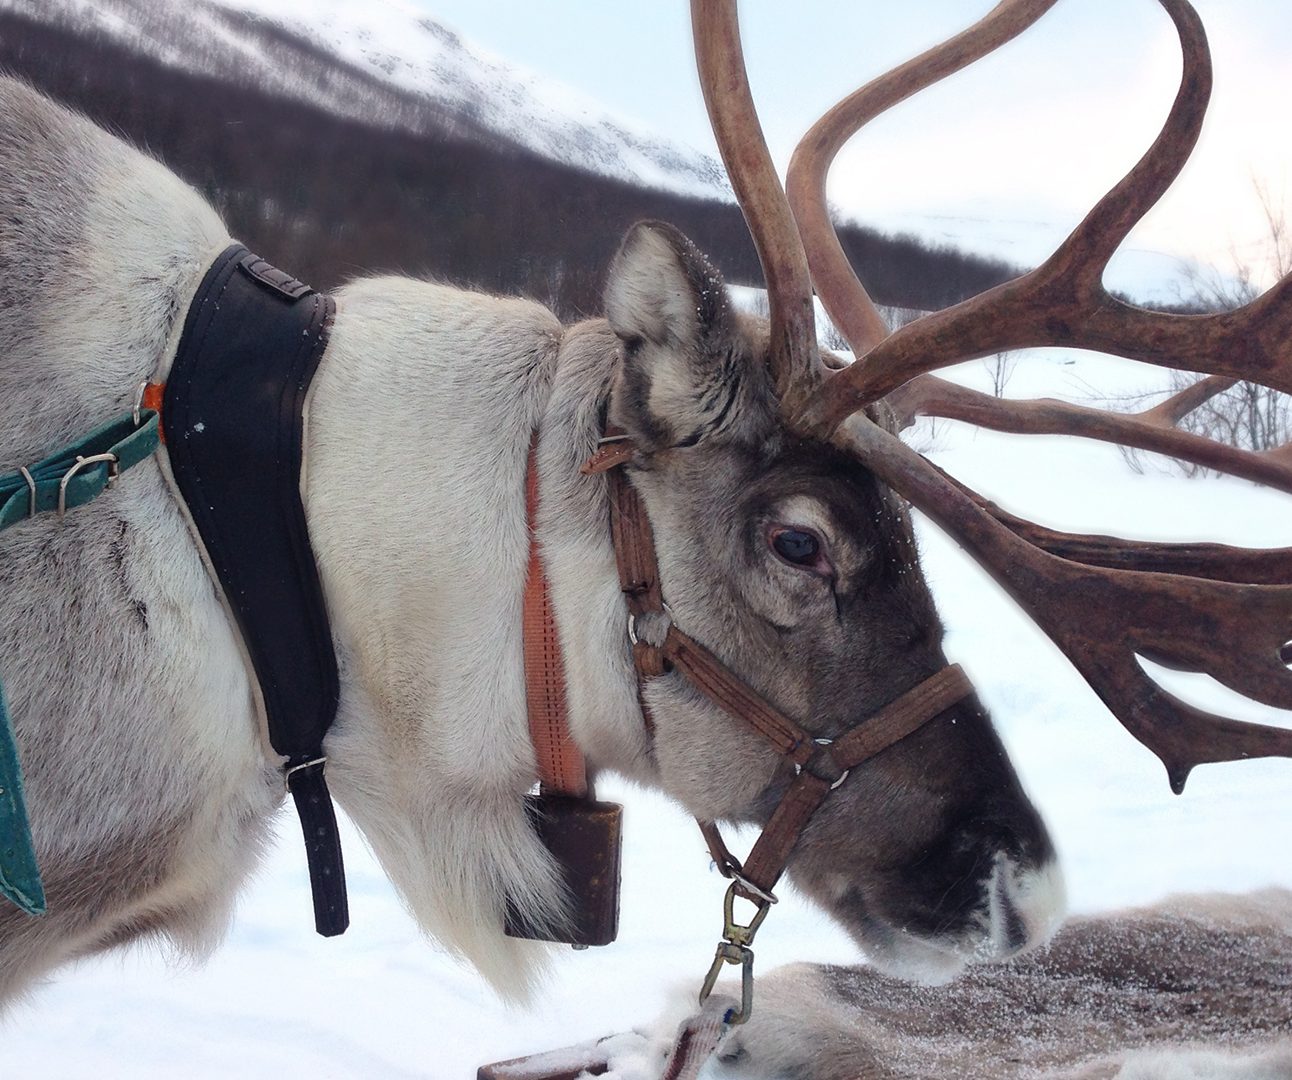 Close up of a reindeer in profile, with large antlers and wearing a harness